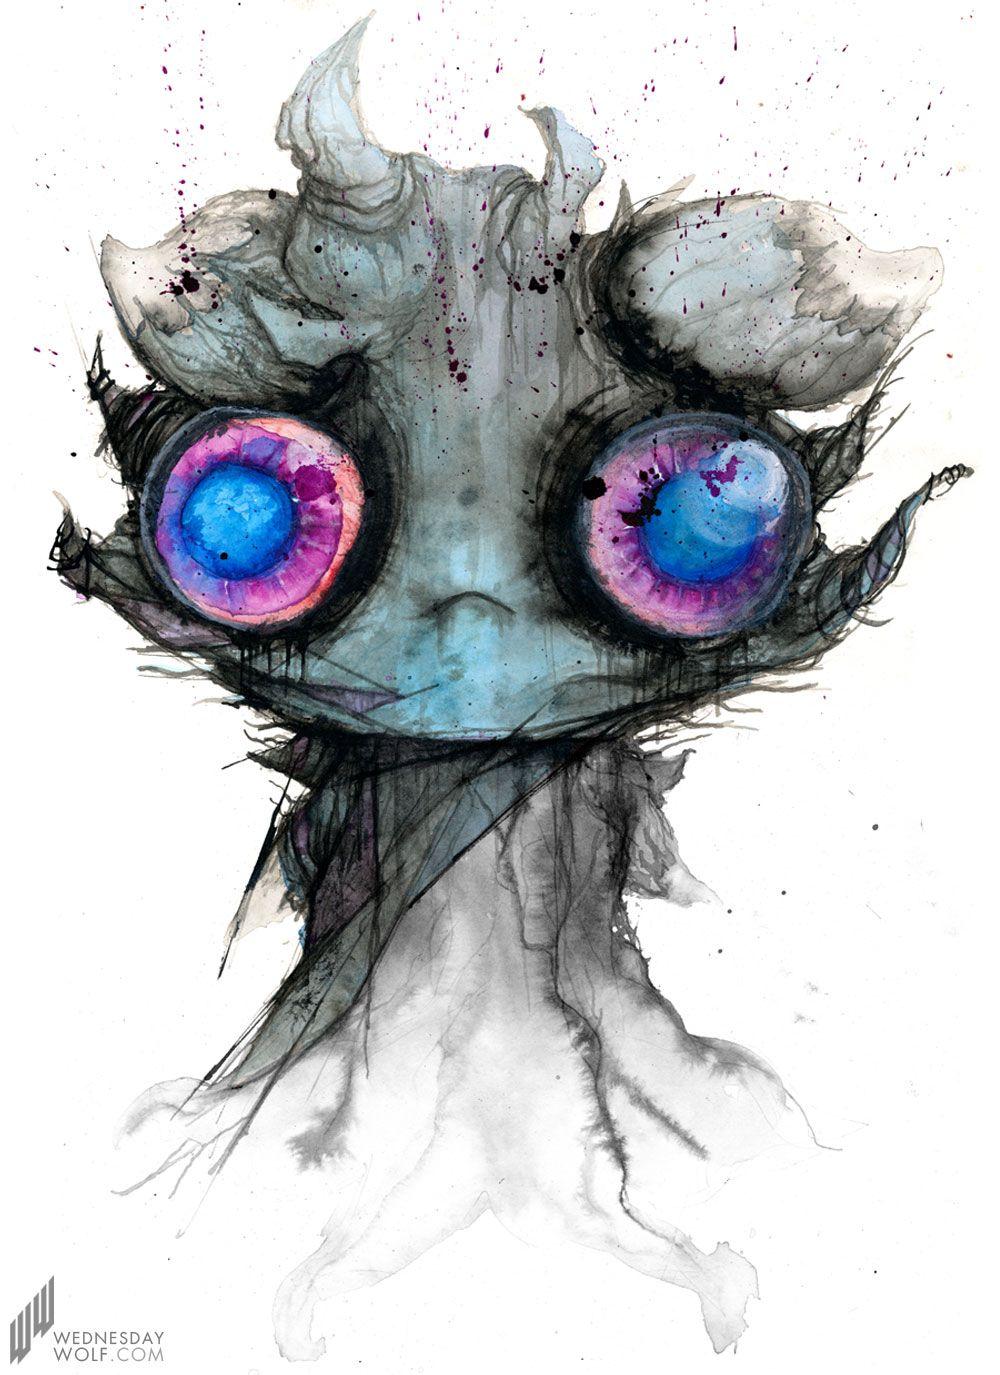 Espurr painted her with Watercolours, Ink, Spit & Blood